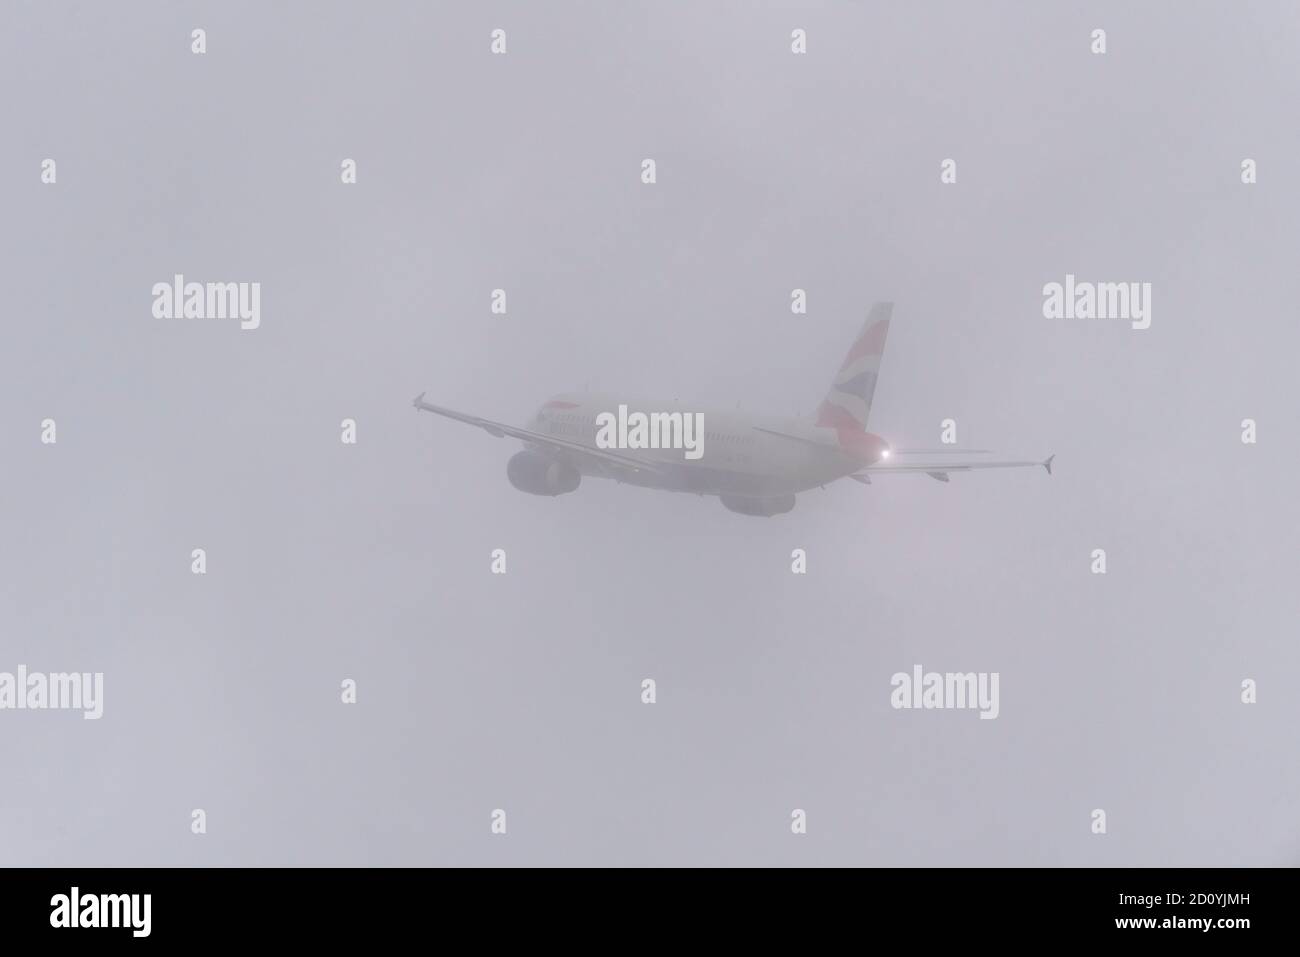 British Airways Airbus A320 jet airliner plane taking off in bad weather from London Heathrow Airport, UK. Disappearing into thick cloud. White out Stock Photo